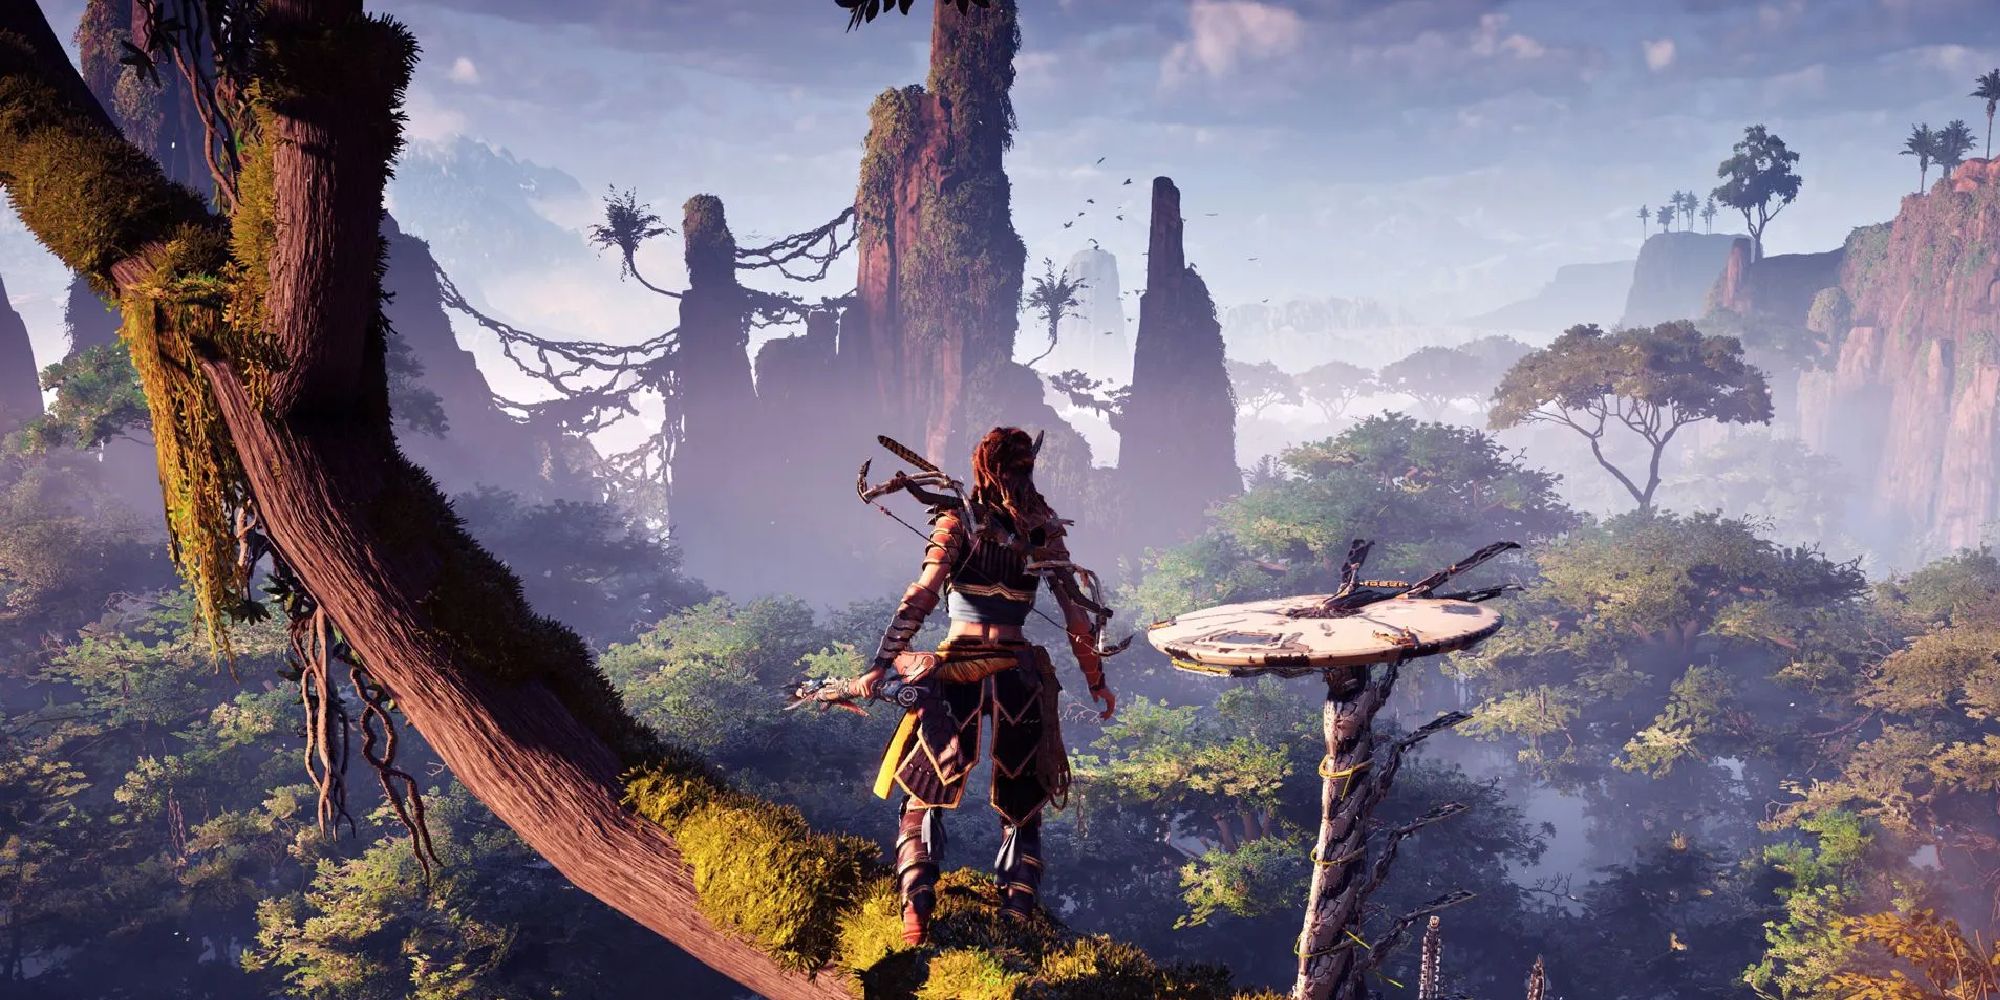 Aloy stands on a thick tree branch, overlooking the jungle-like world. 